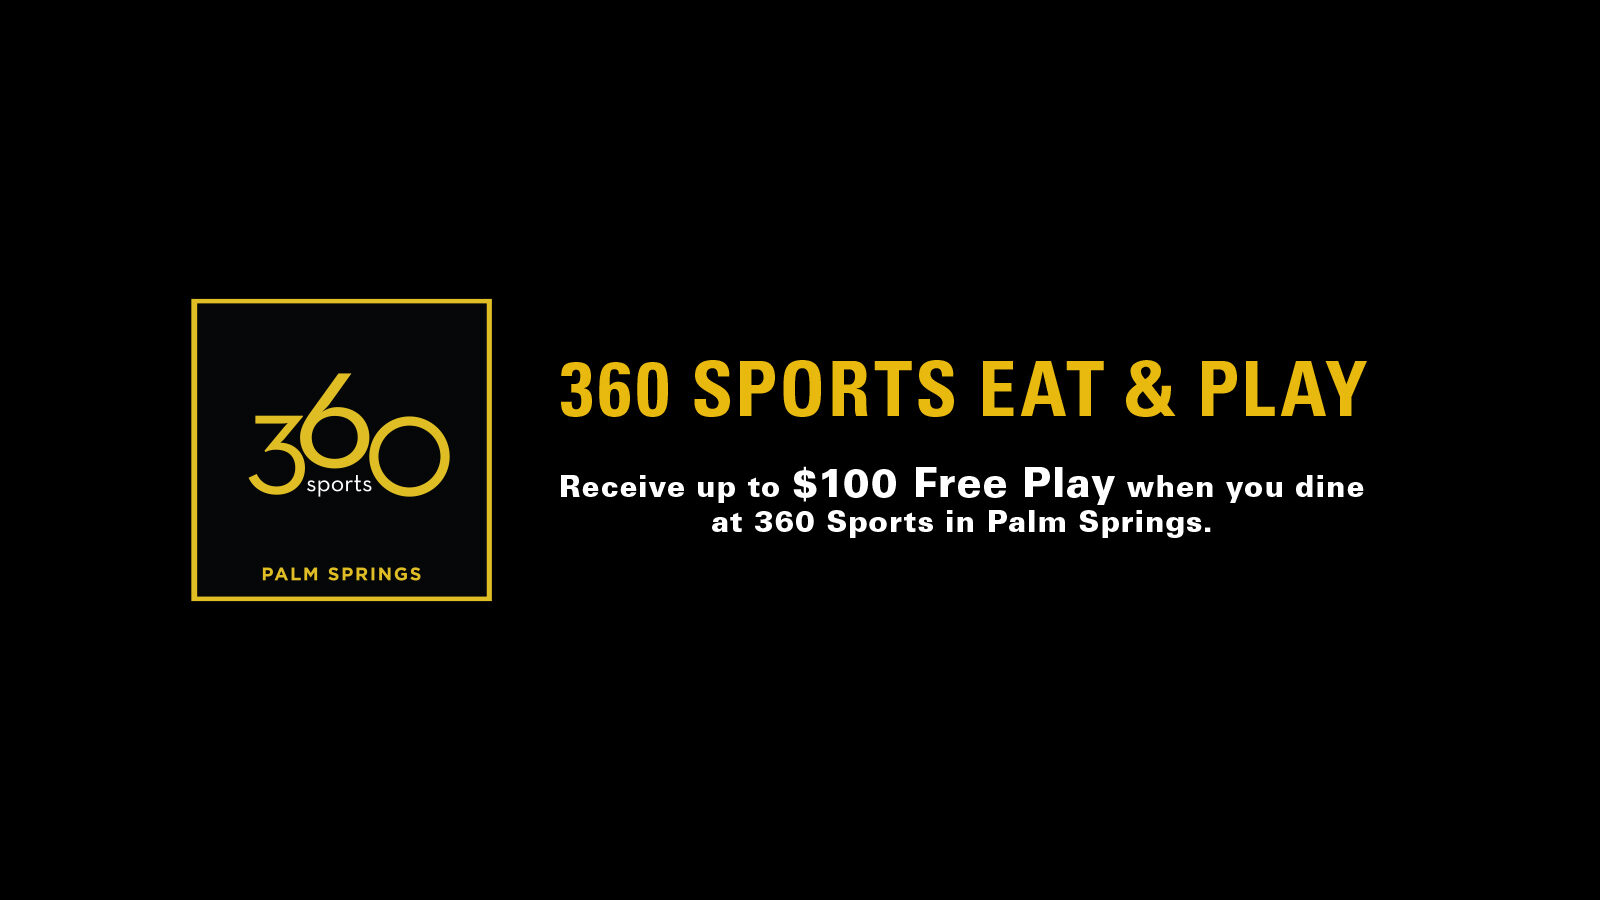 360 Sports Eat & Play